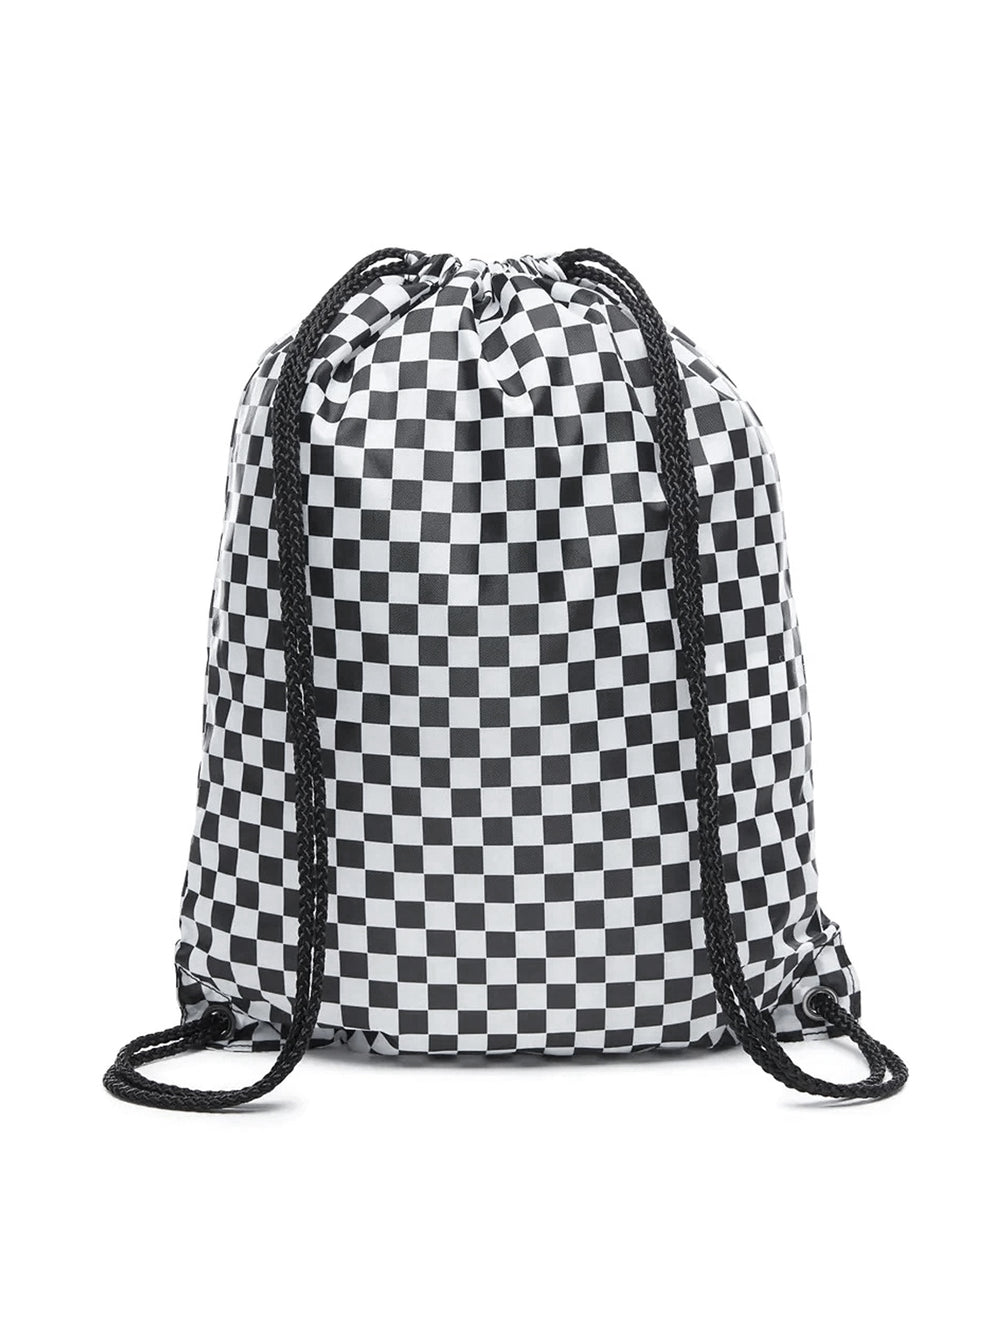 VANS BENCHED BAG - CHECKER - CLEARANCE